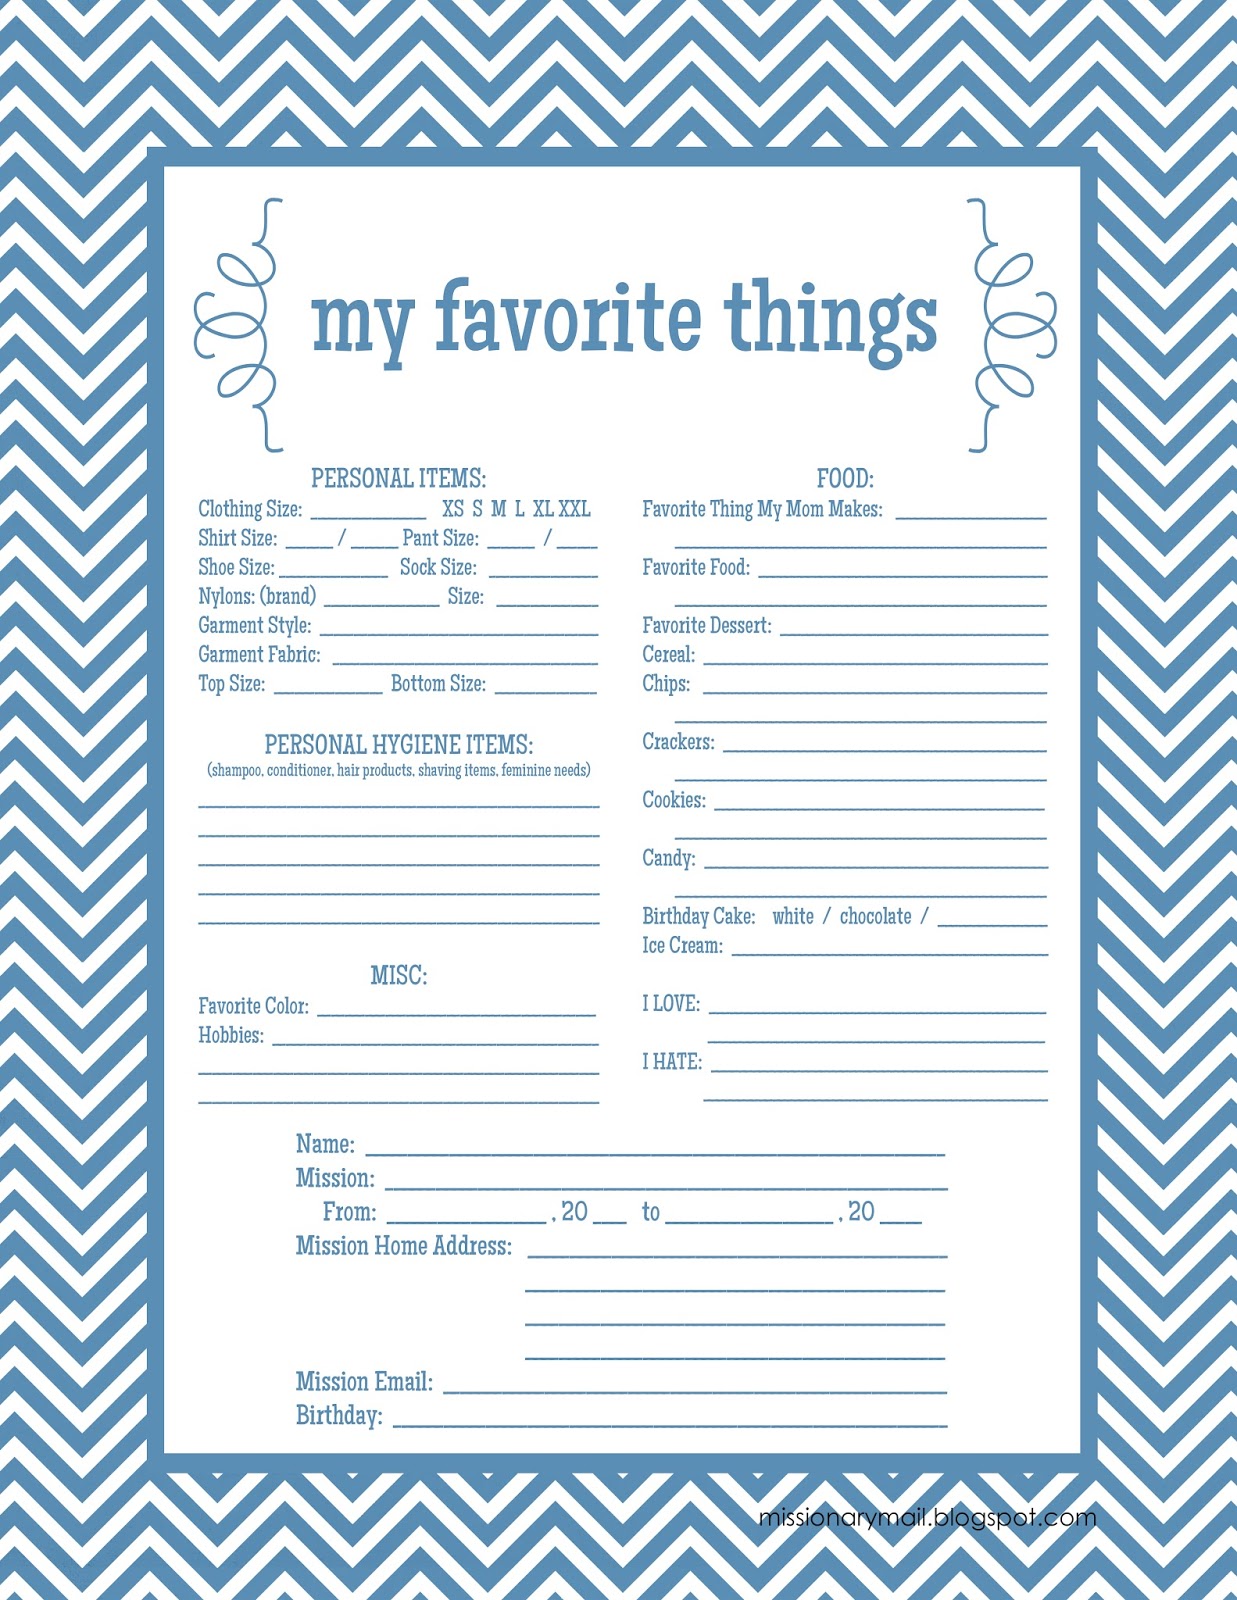 Missionary Mail "My Favorite Things" printable